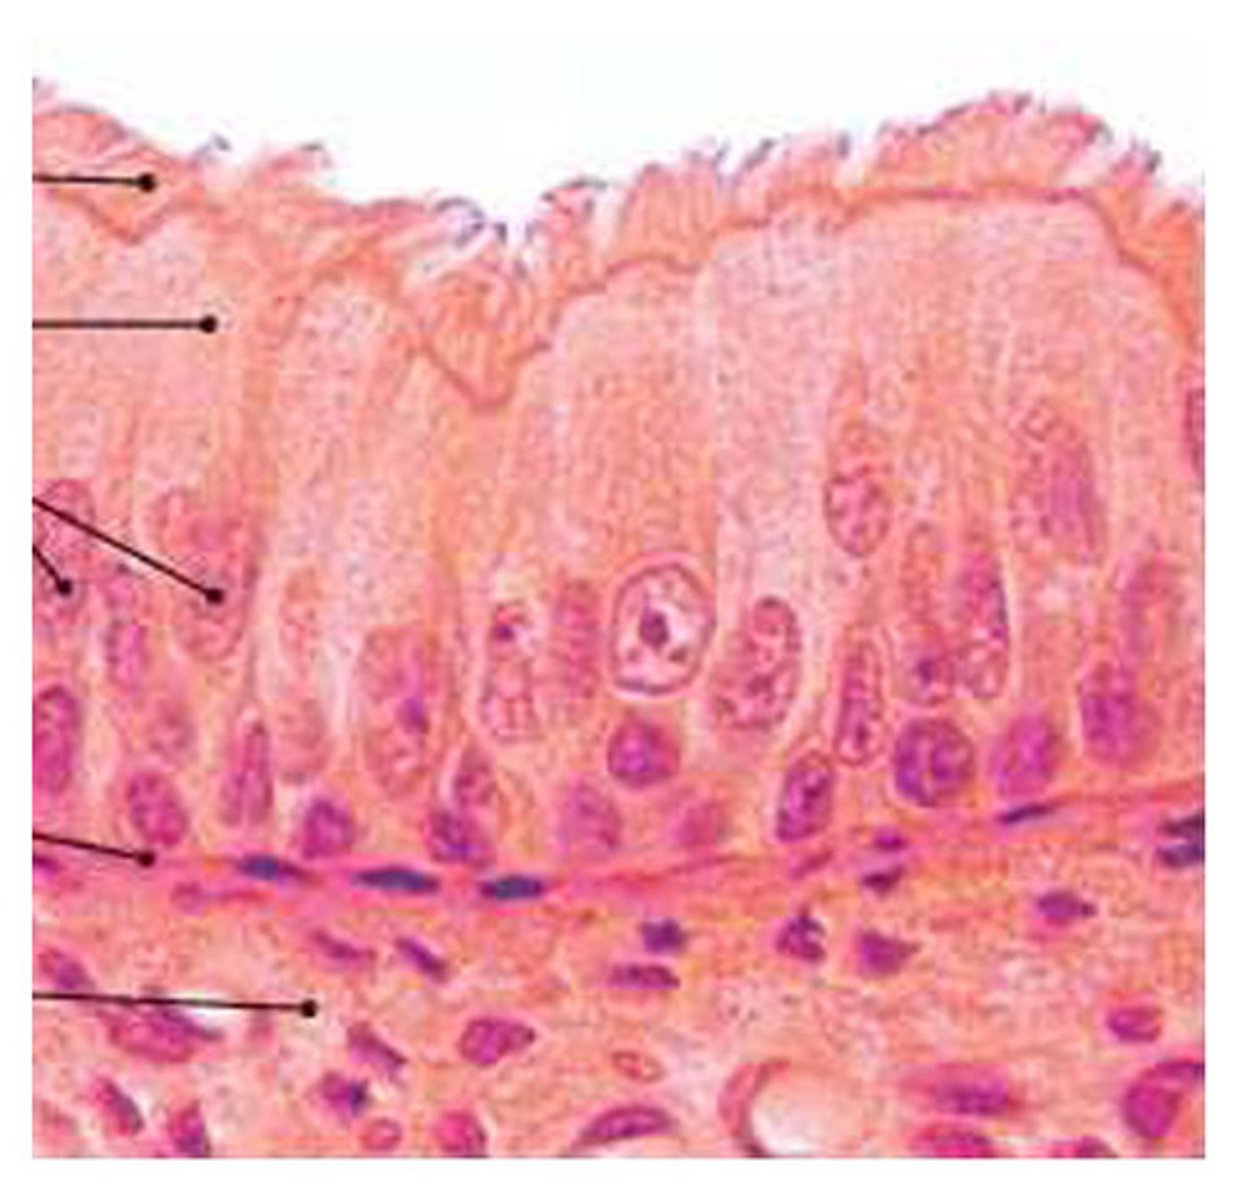 <p>single layer of different size cells, only some reaching the surface, containing cilia on apical surface</p><p>allows surface parallel transport and secretion of mucous</p><p>located to move substances along the surface of the epithelium without smooth muscle, e.g. trachea</p>